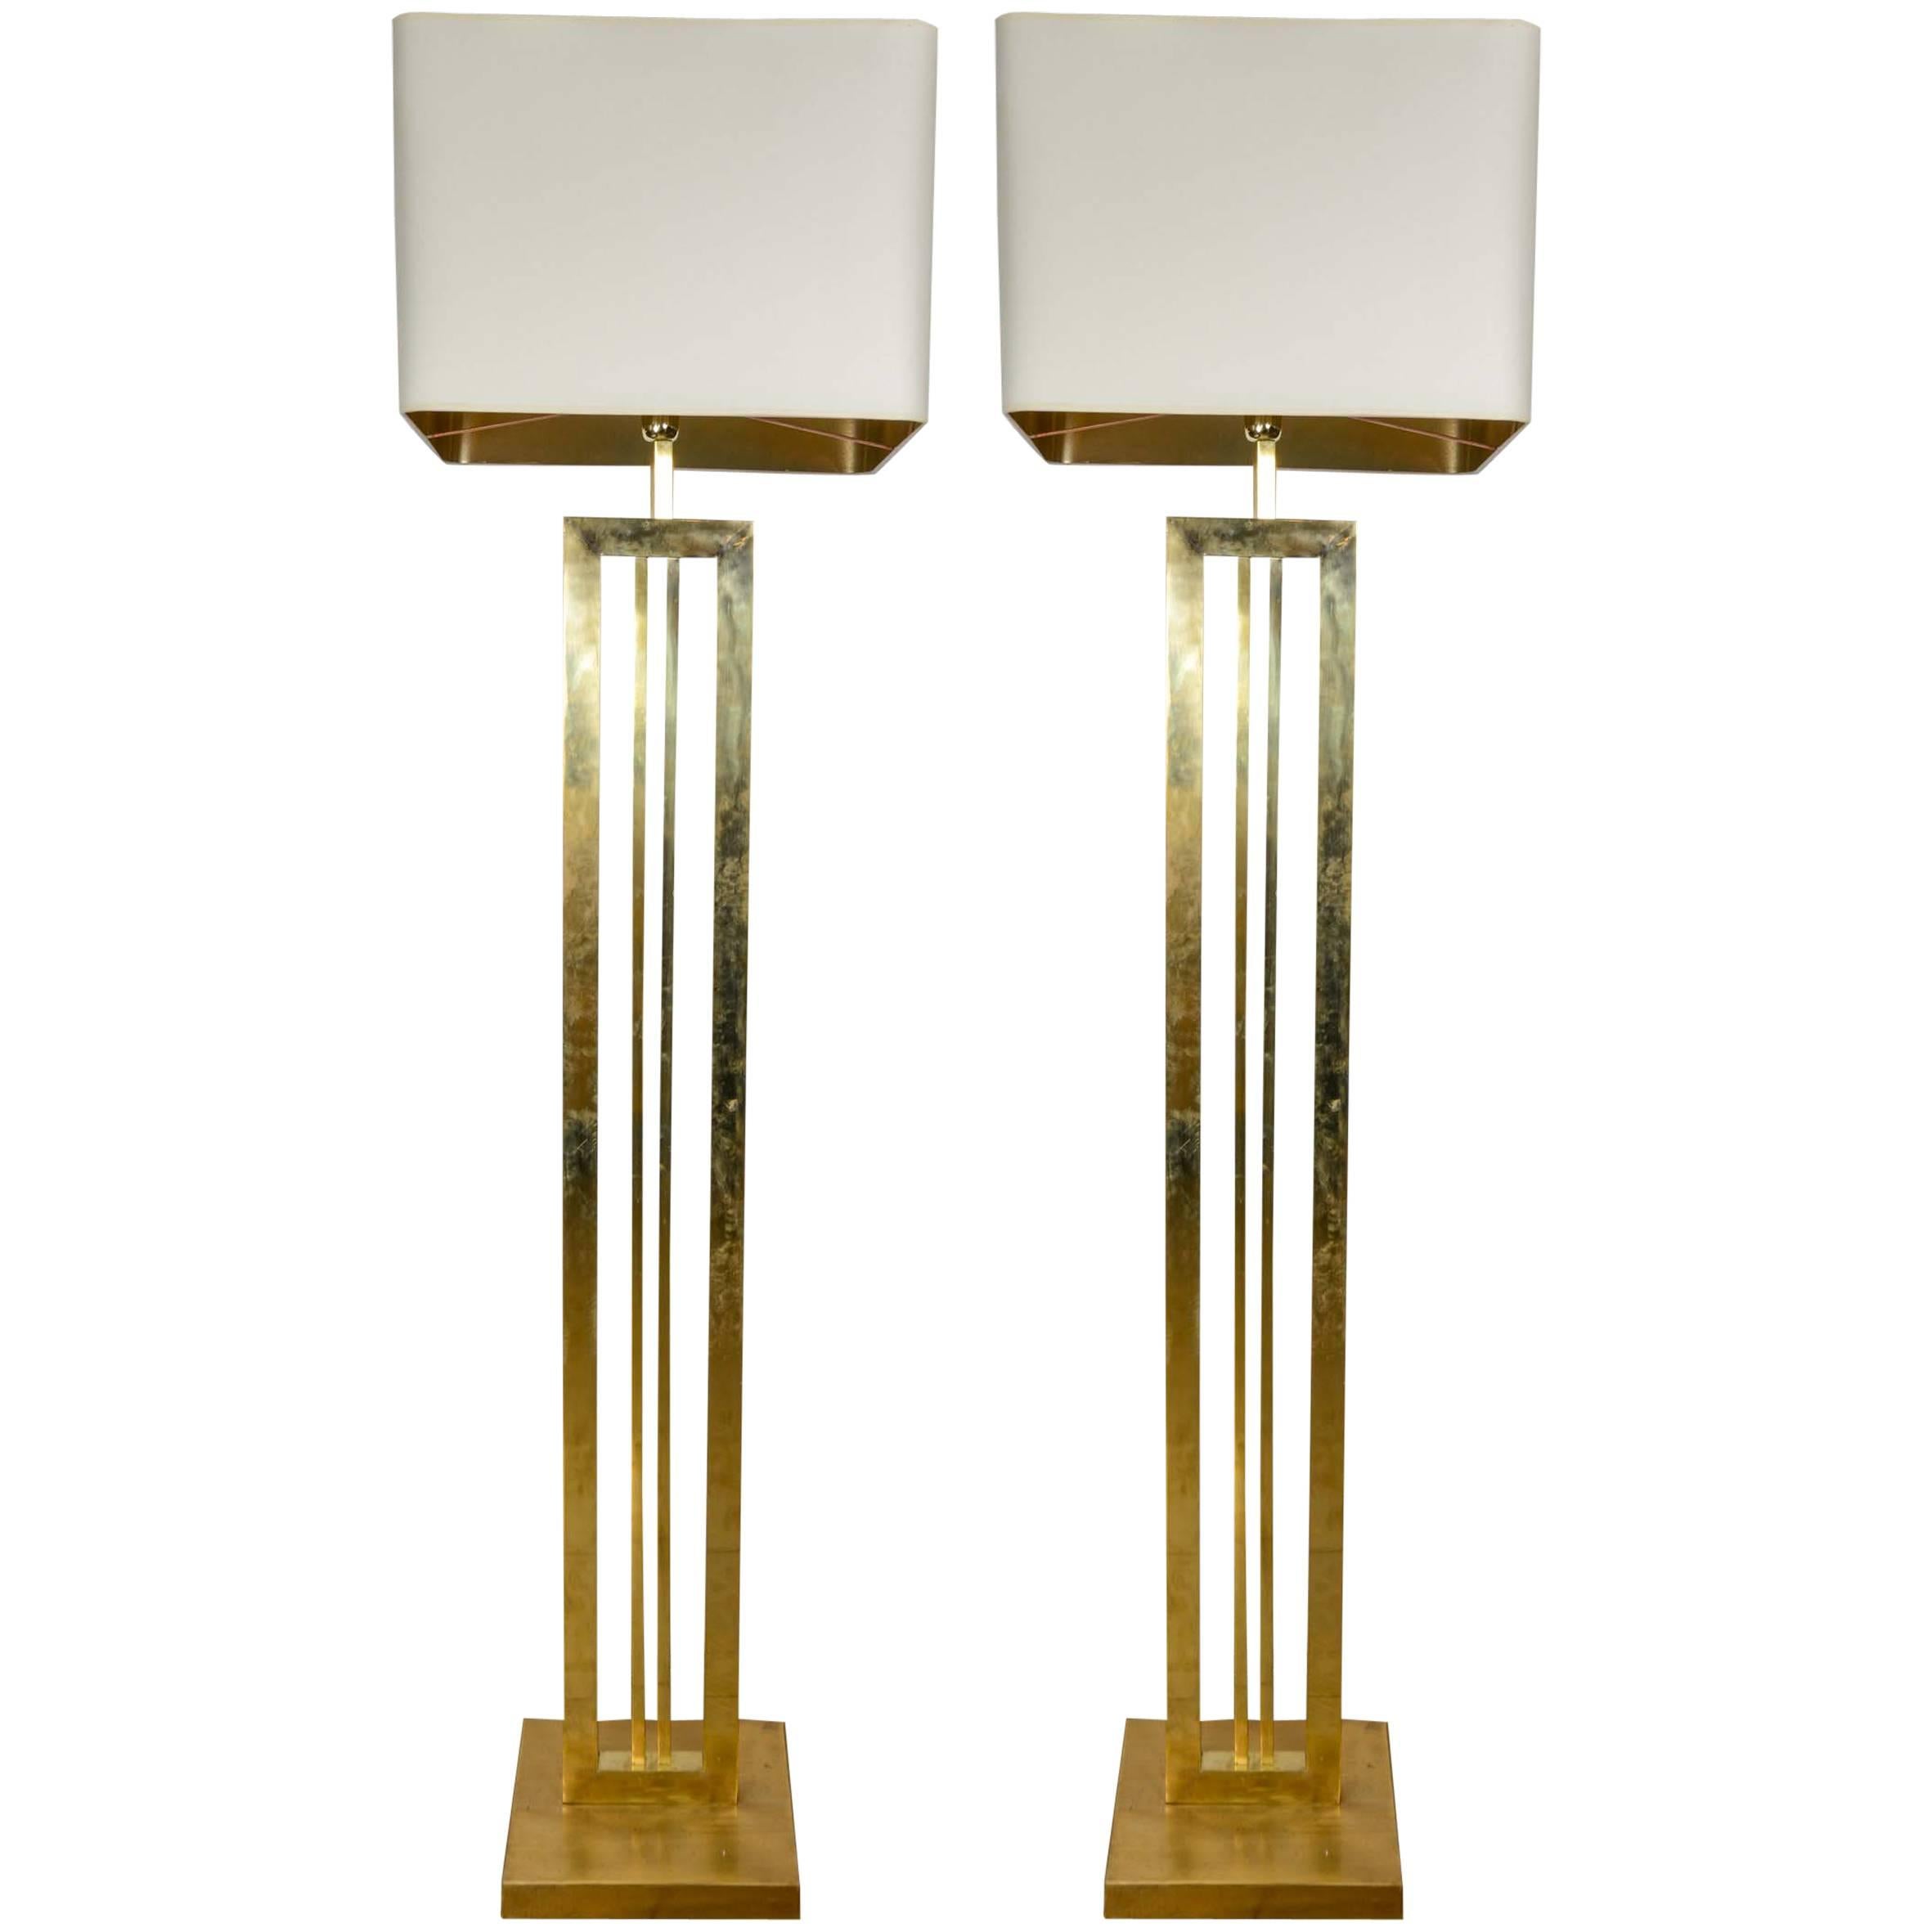 Pair of Brass Floor Lamps at cost price. For Sale